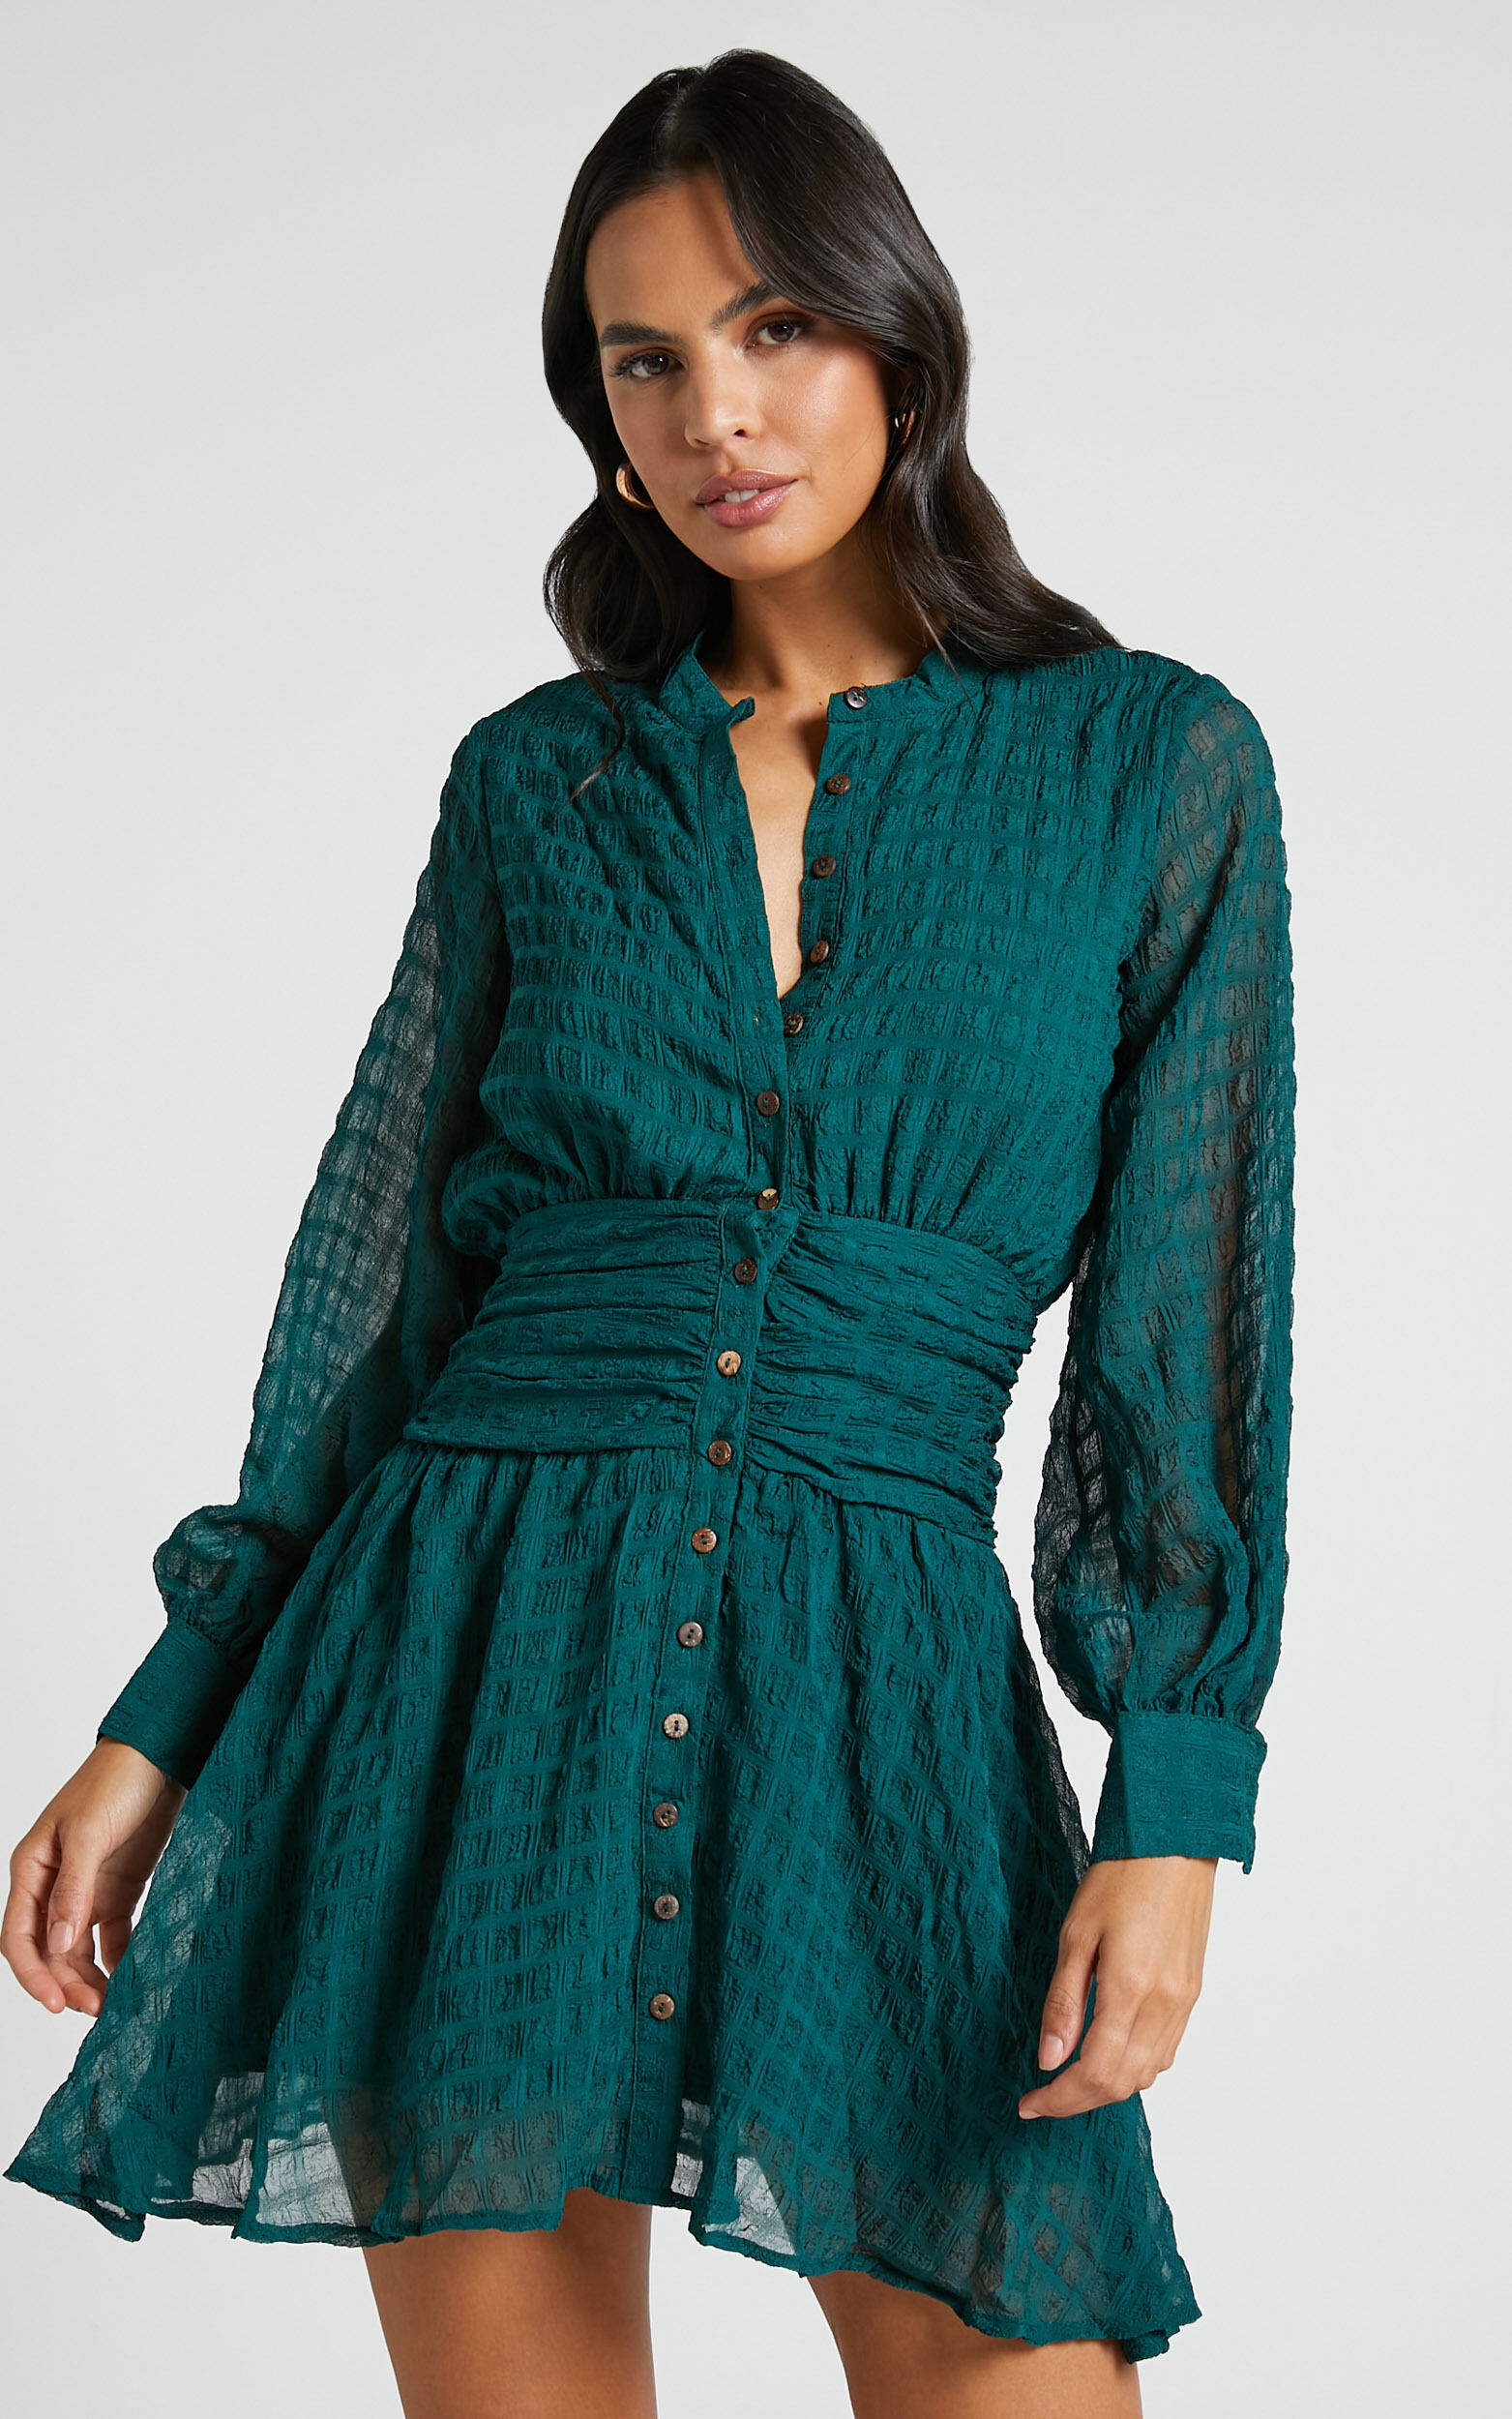 Pippie Mini Dress - Ruched Waist Long Sleeve Textured Dress in Emerald - 06, GRN1, super-hi-res image number null